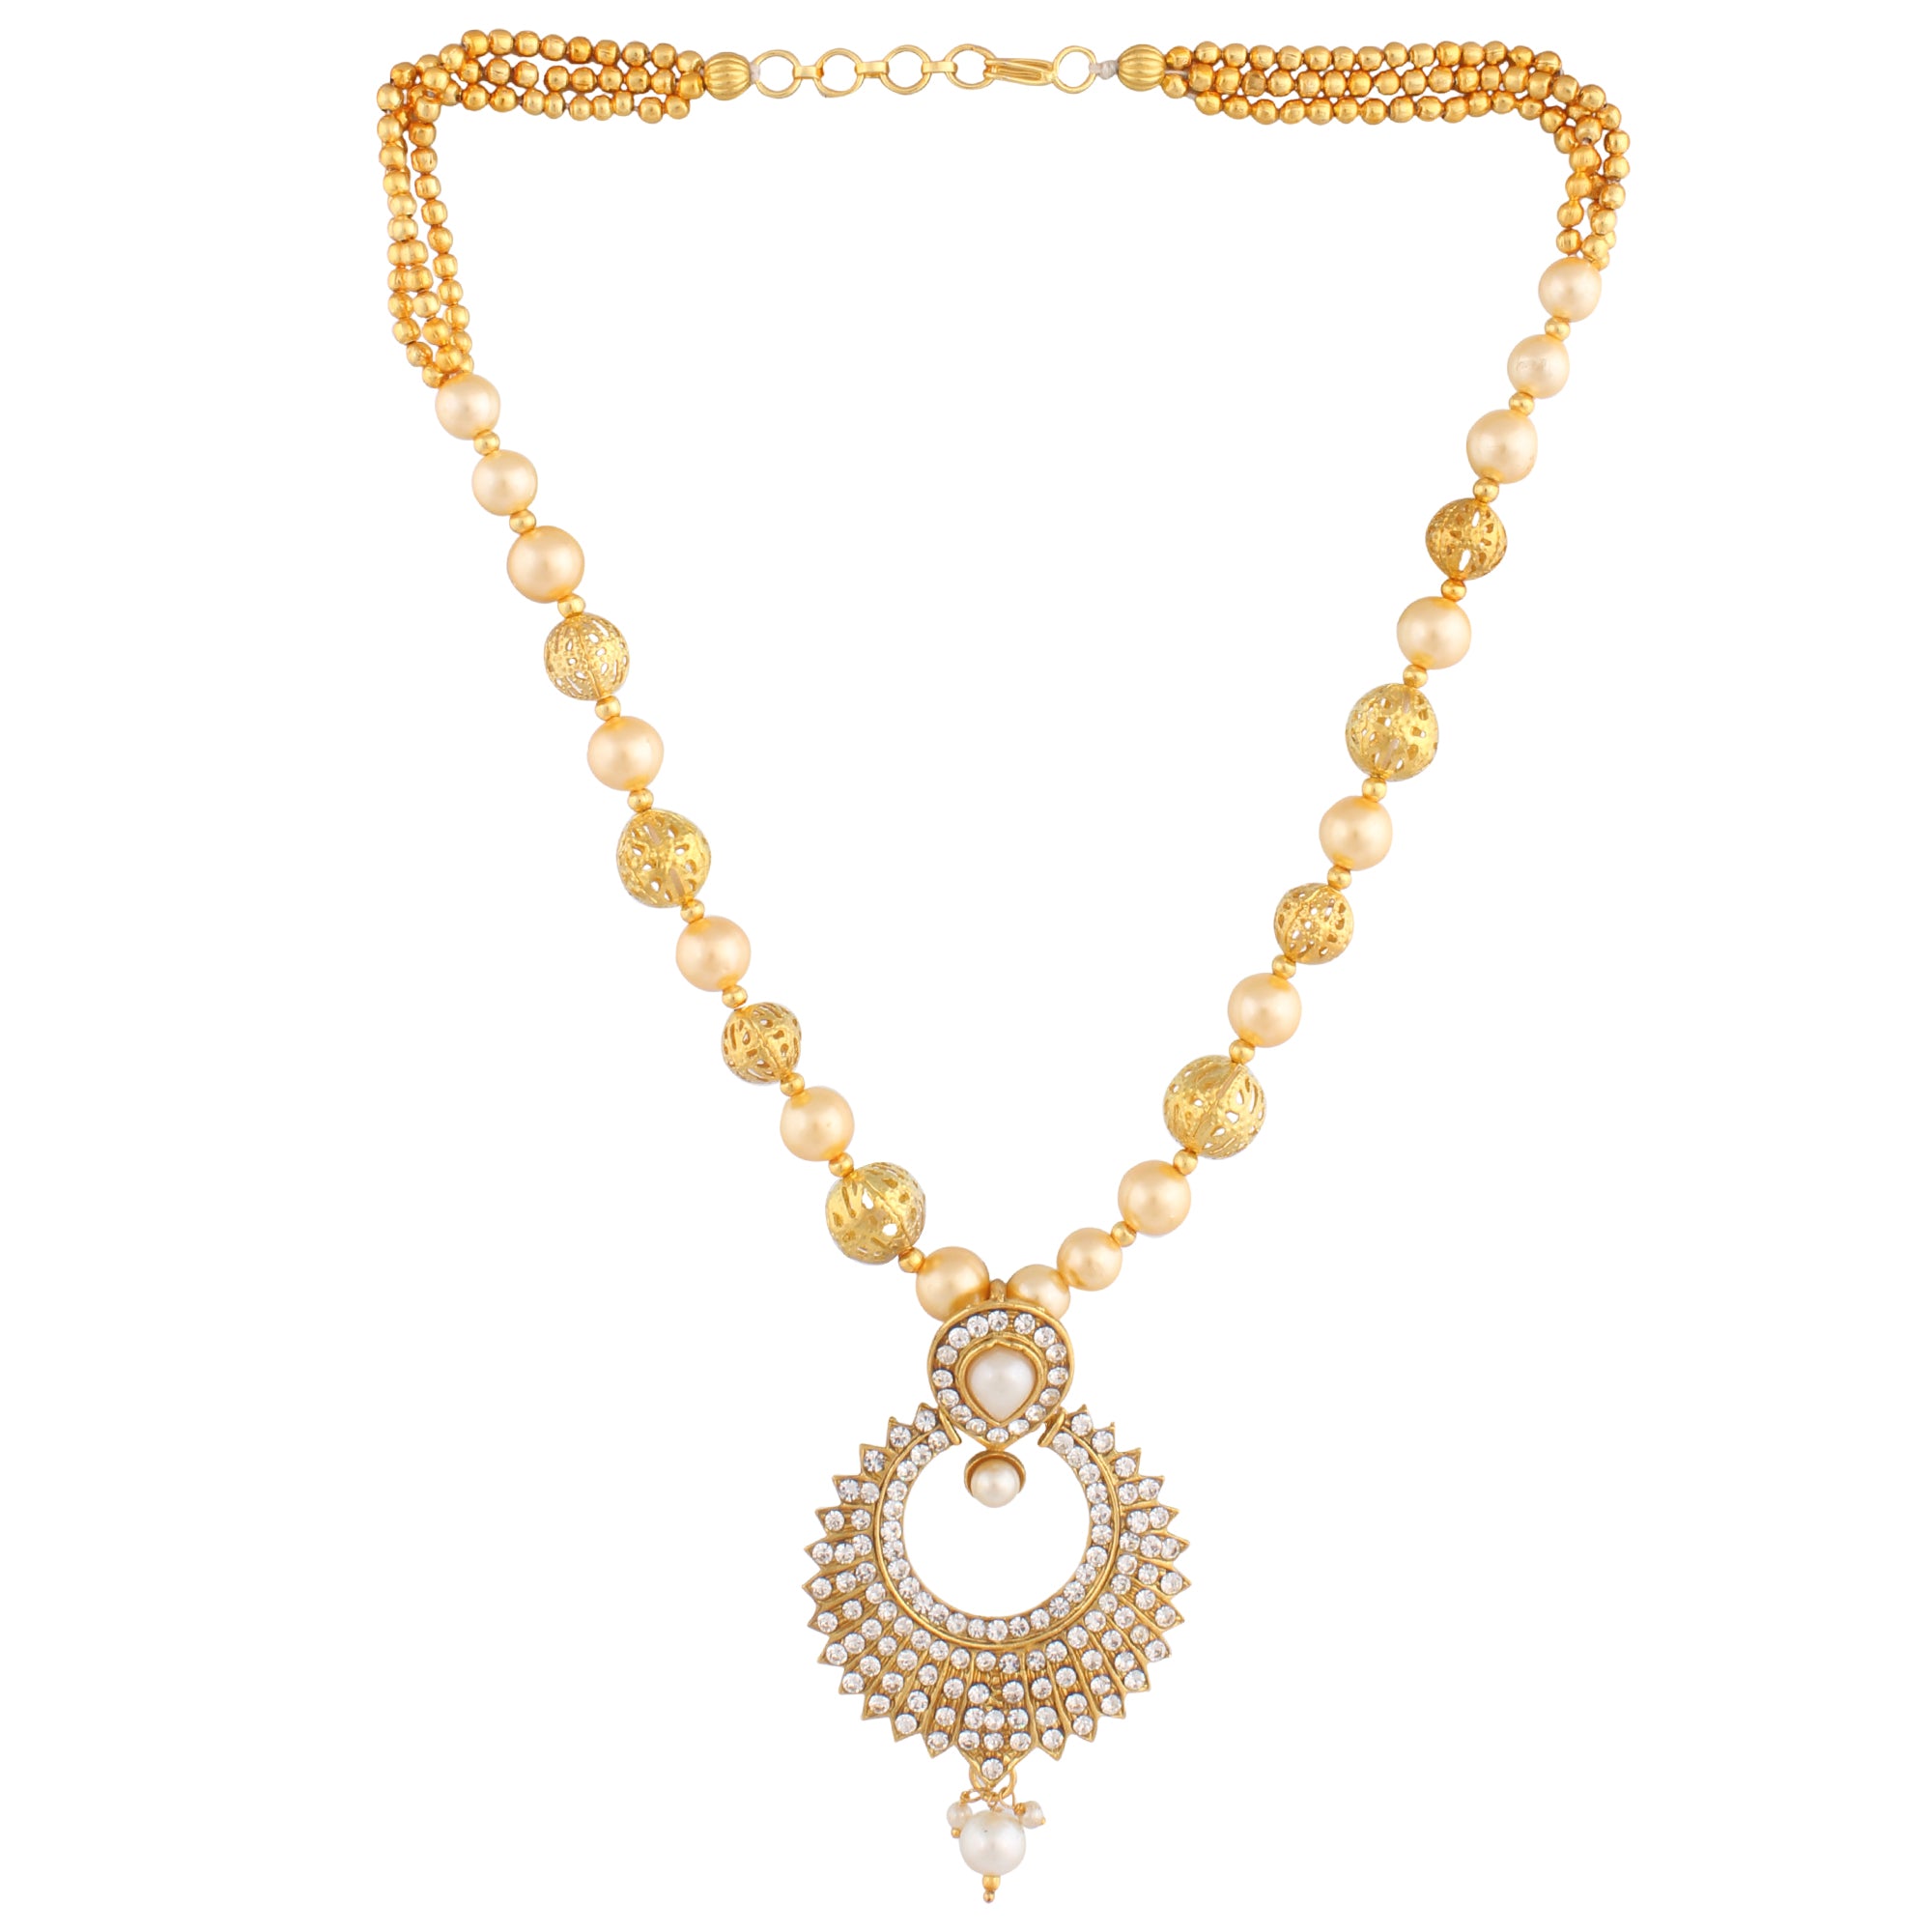 Indian Jewellery from Meira Jewellery:Necklace,PEARL NECKLACE SET WITH MELEE AMERICAN DIAMONDS IN CHANEL DESIGN & MATCHING EARRING FOR WOMEN